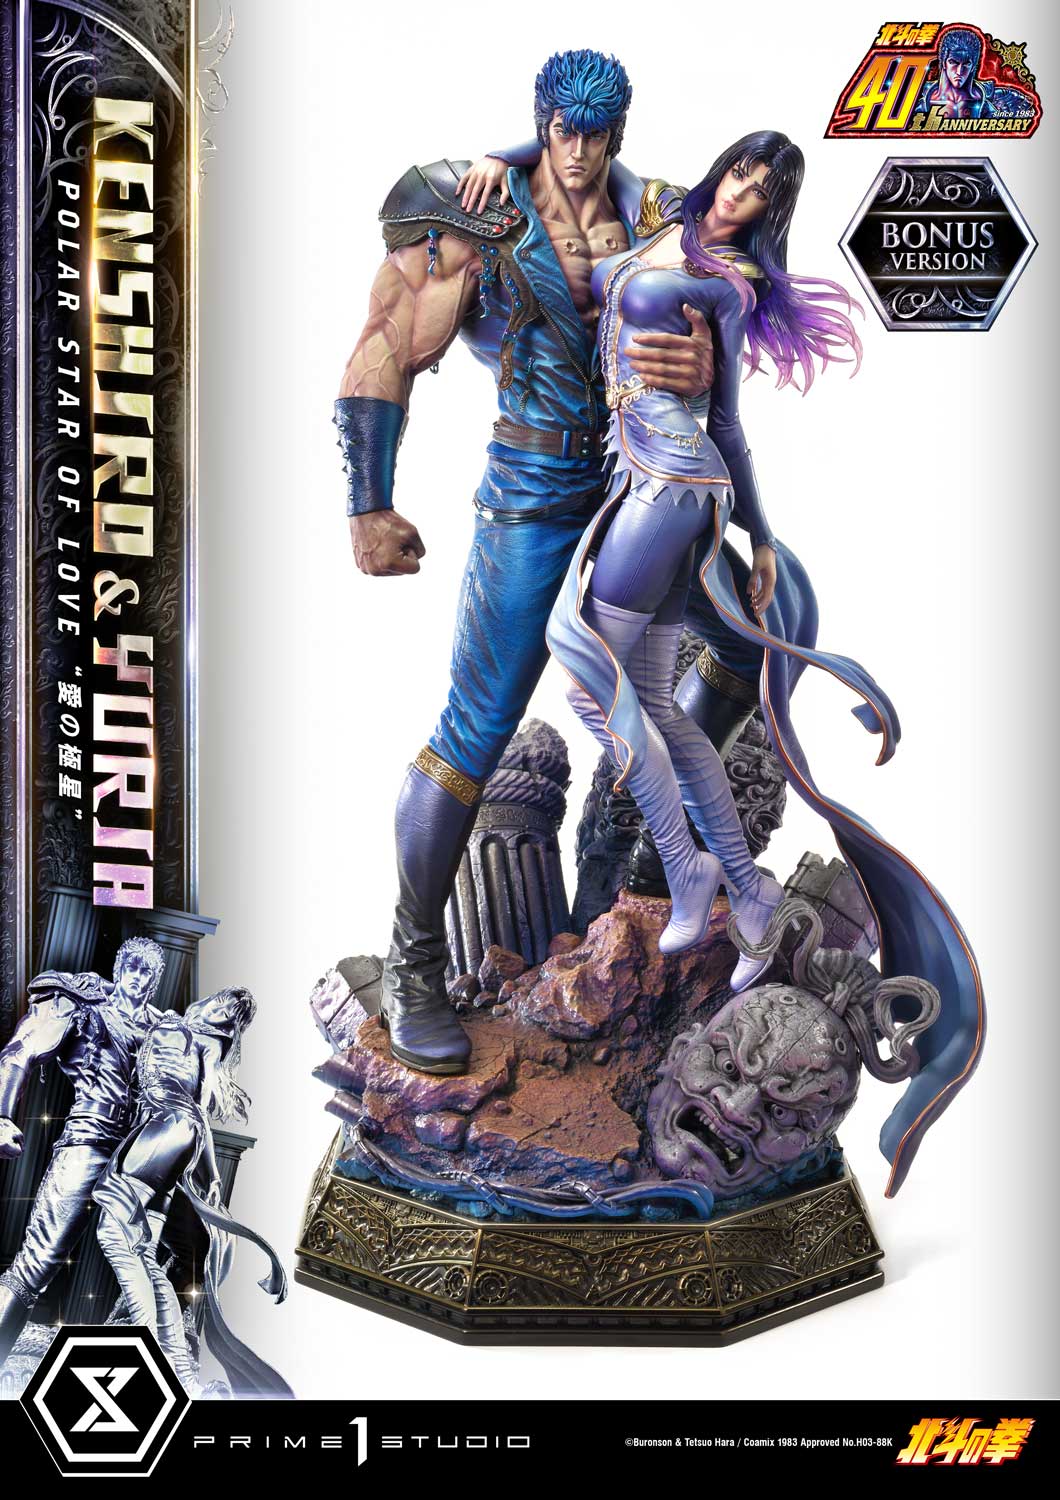 Statue Miss Fortune Leagues Of Legends 1/4 - INFINITY - Galaxy Pop